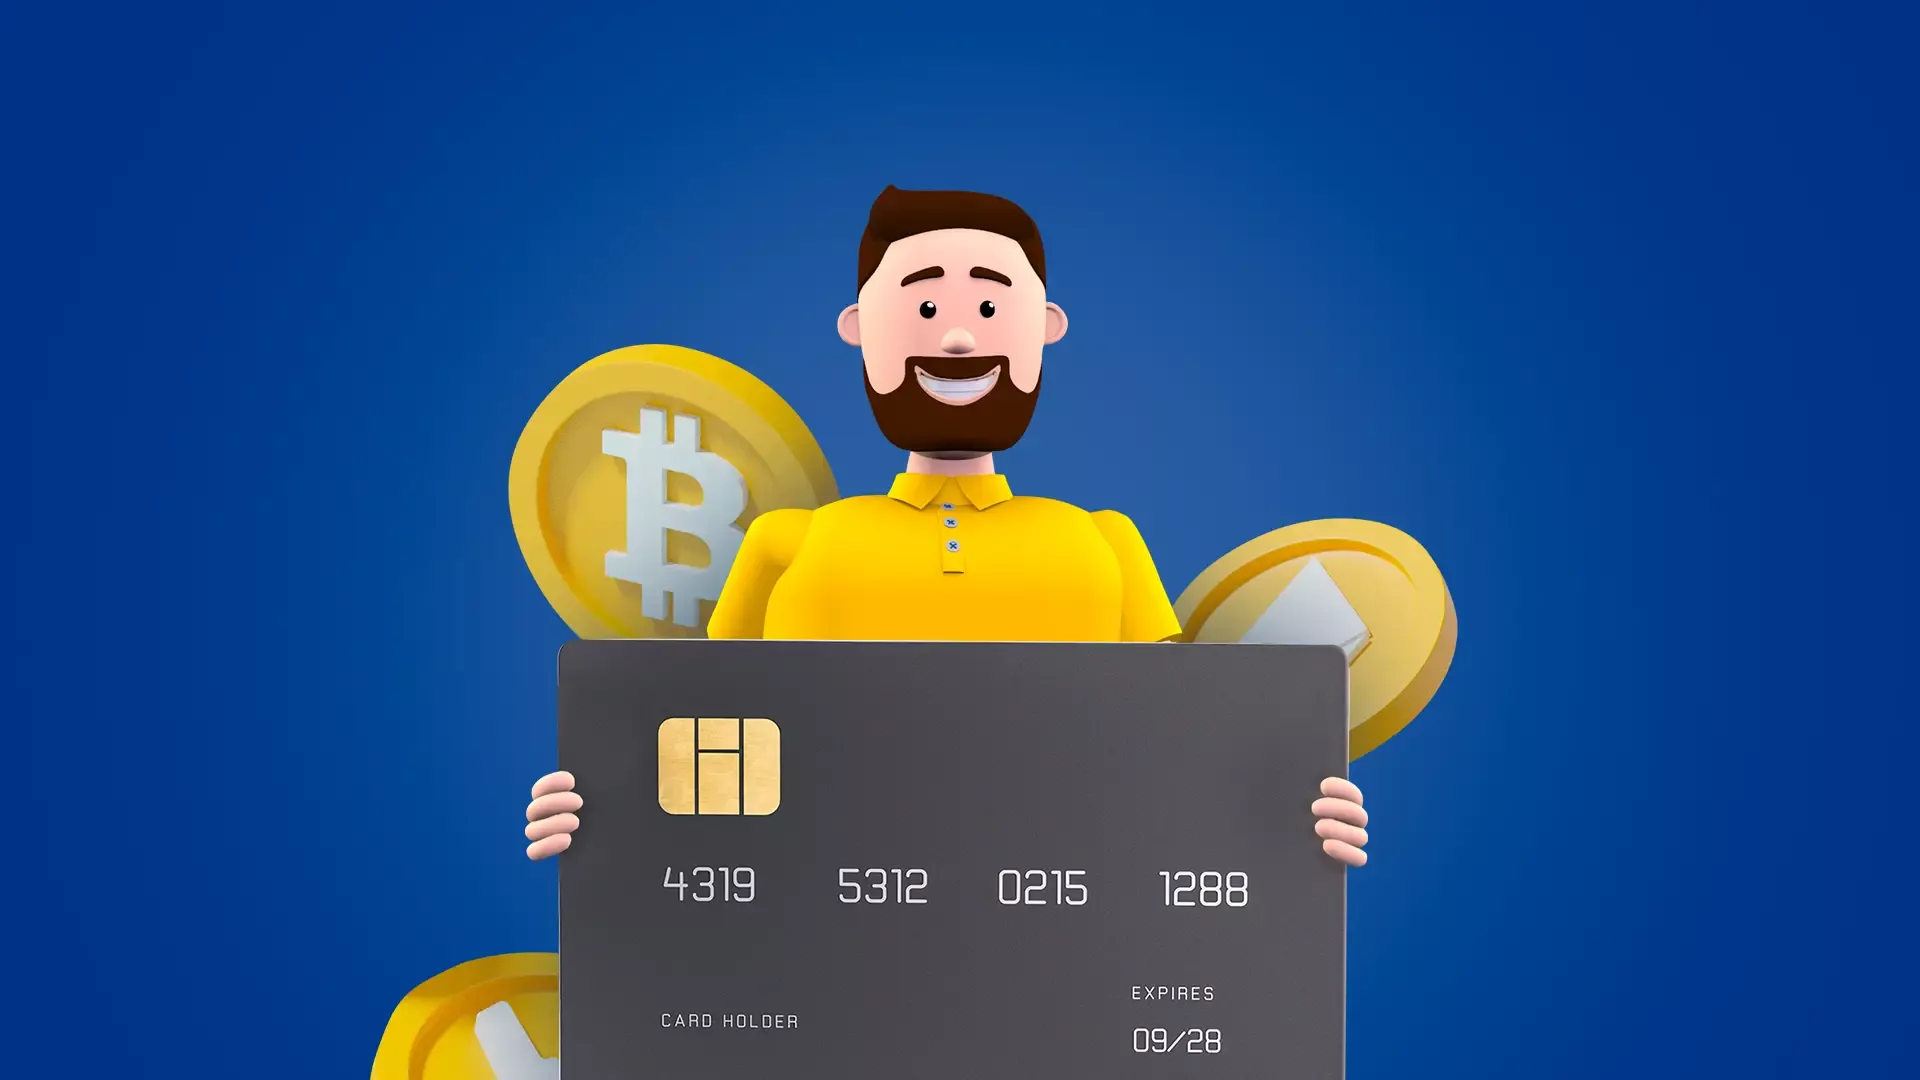 Cryptocurrency purchase is easy at WEXO. All you need is a credit card